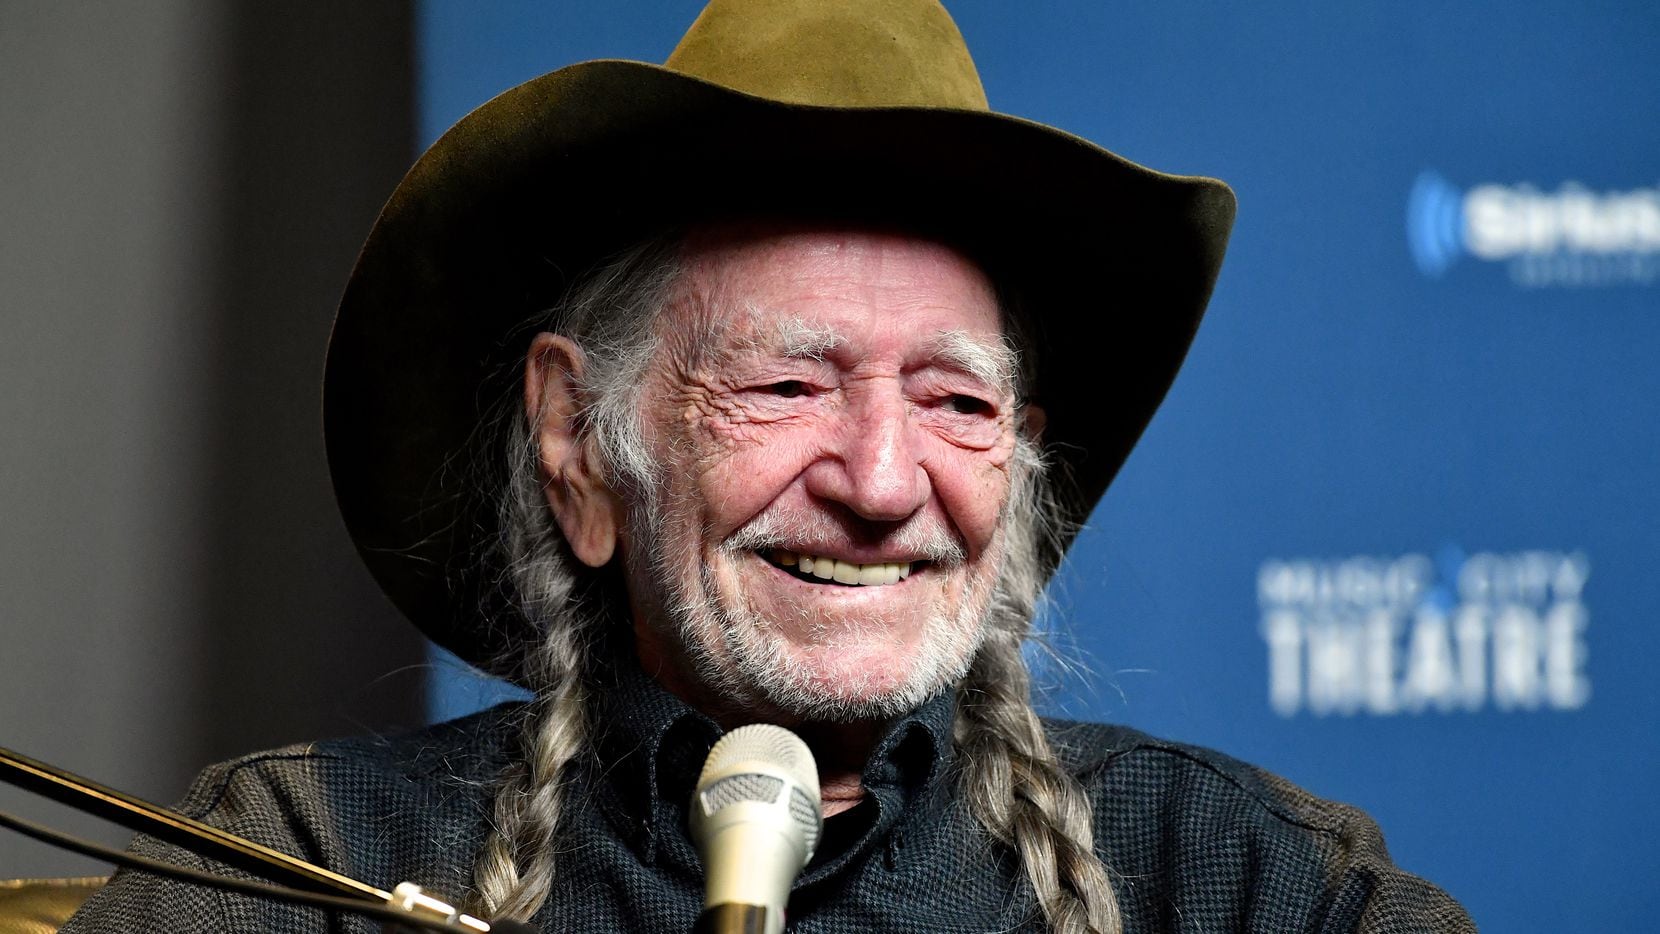 Willie Nelson turns 87, with no shortage of vim, vigor or weed ...